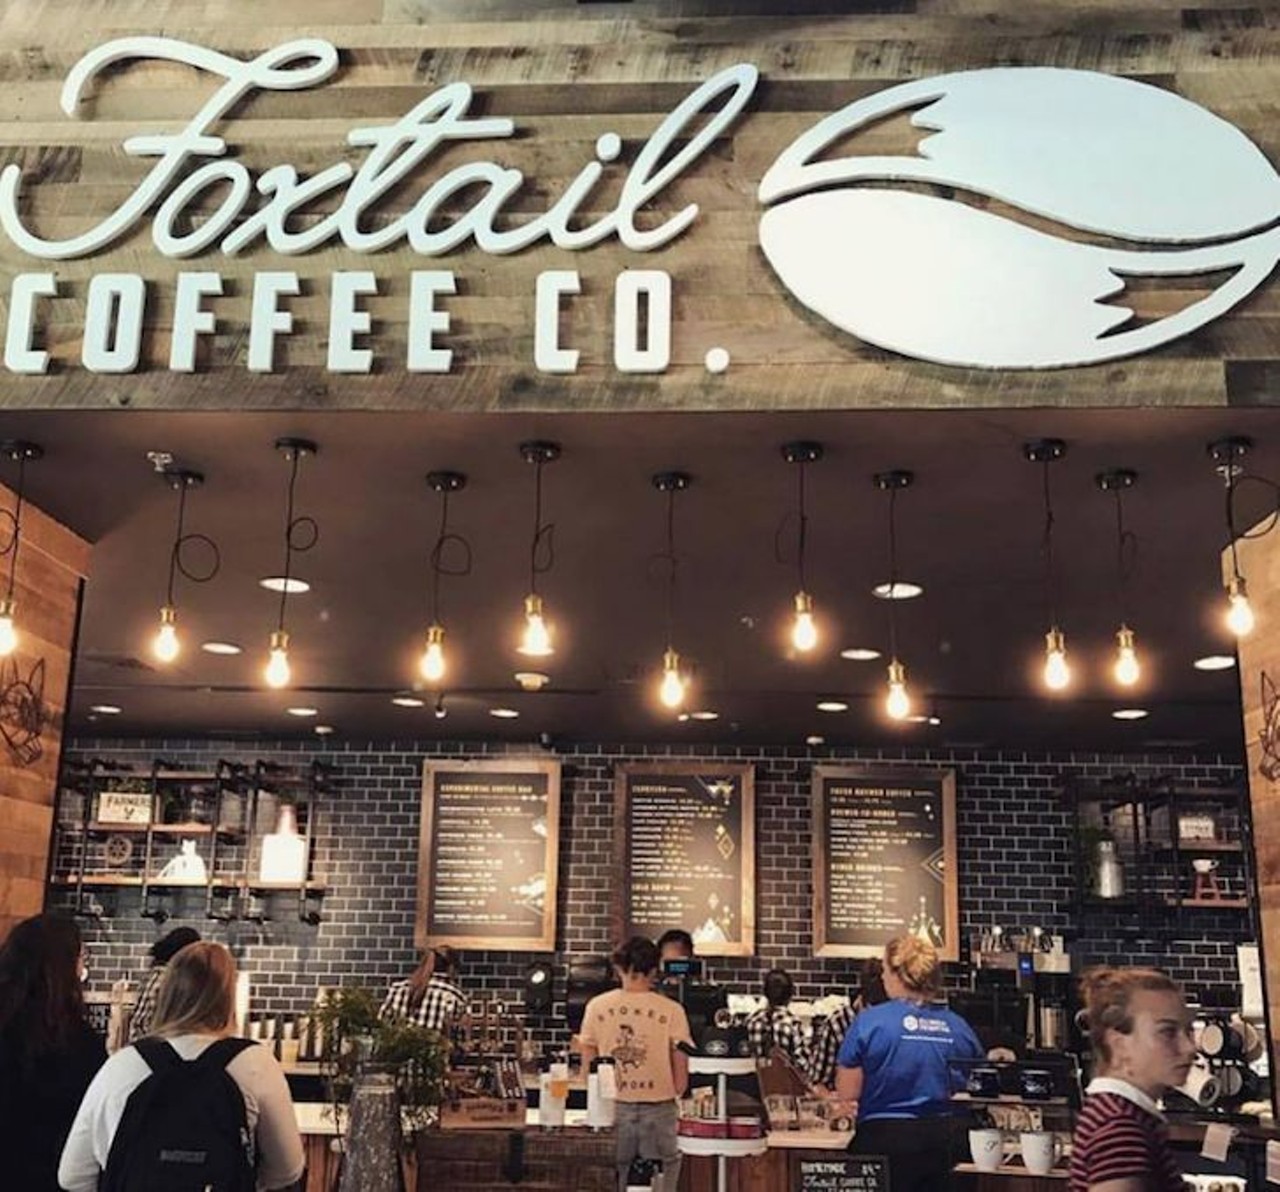 Foxtail Coffee Co.
Locations: 5 Orlando, Winter Park, Altamonte Springs
Founded in Winter Park in December 2016, this coffee shop chain has since exploded, adding another seven locations in the Orlando area. Sip a variety of responsibly sourced coffees in a relaxed atmosphere.
Photo via Foxtail Coffee/Facebook